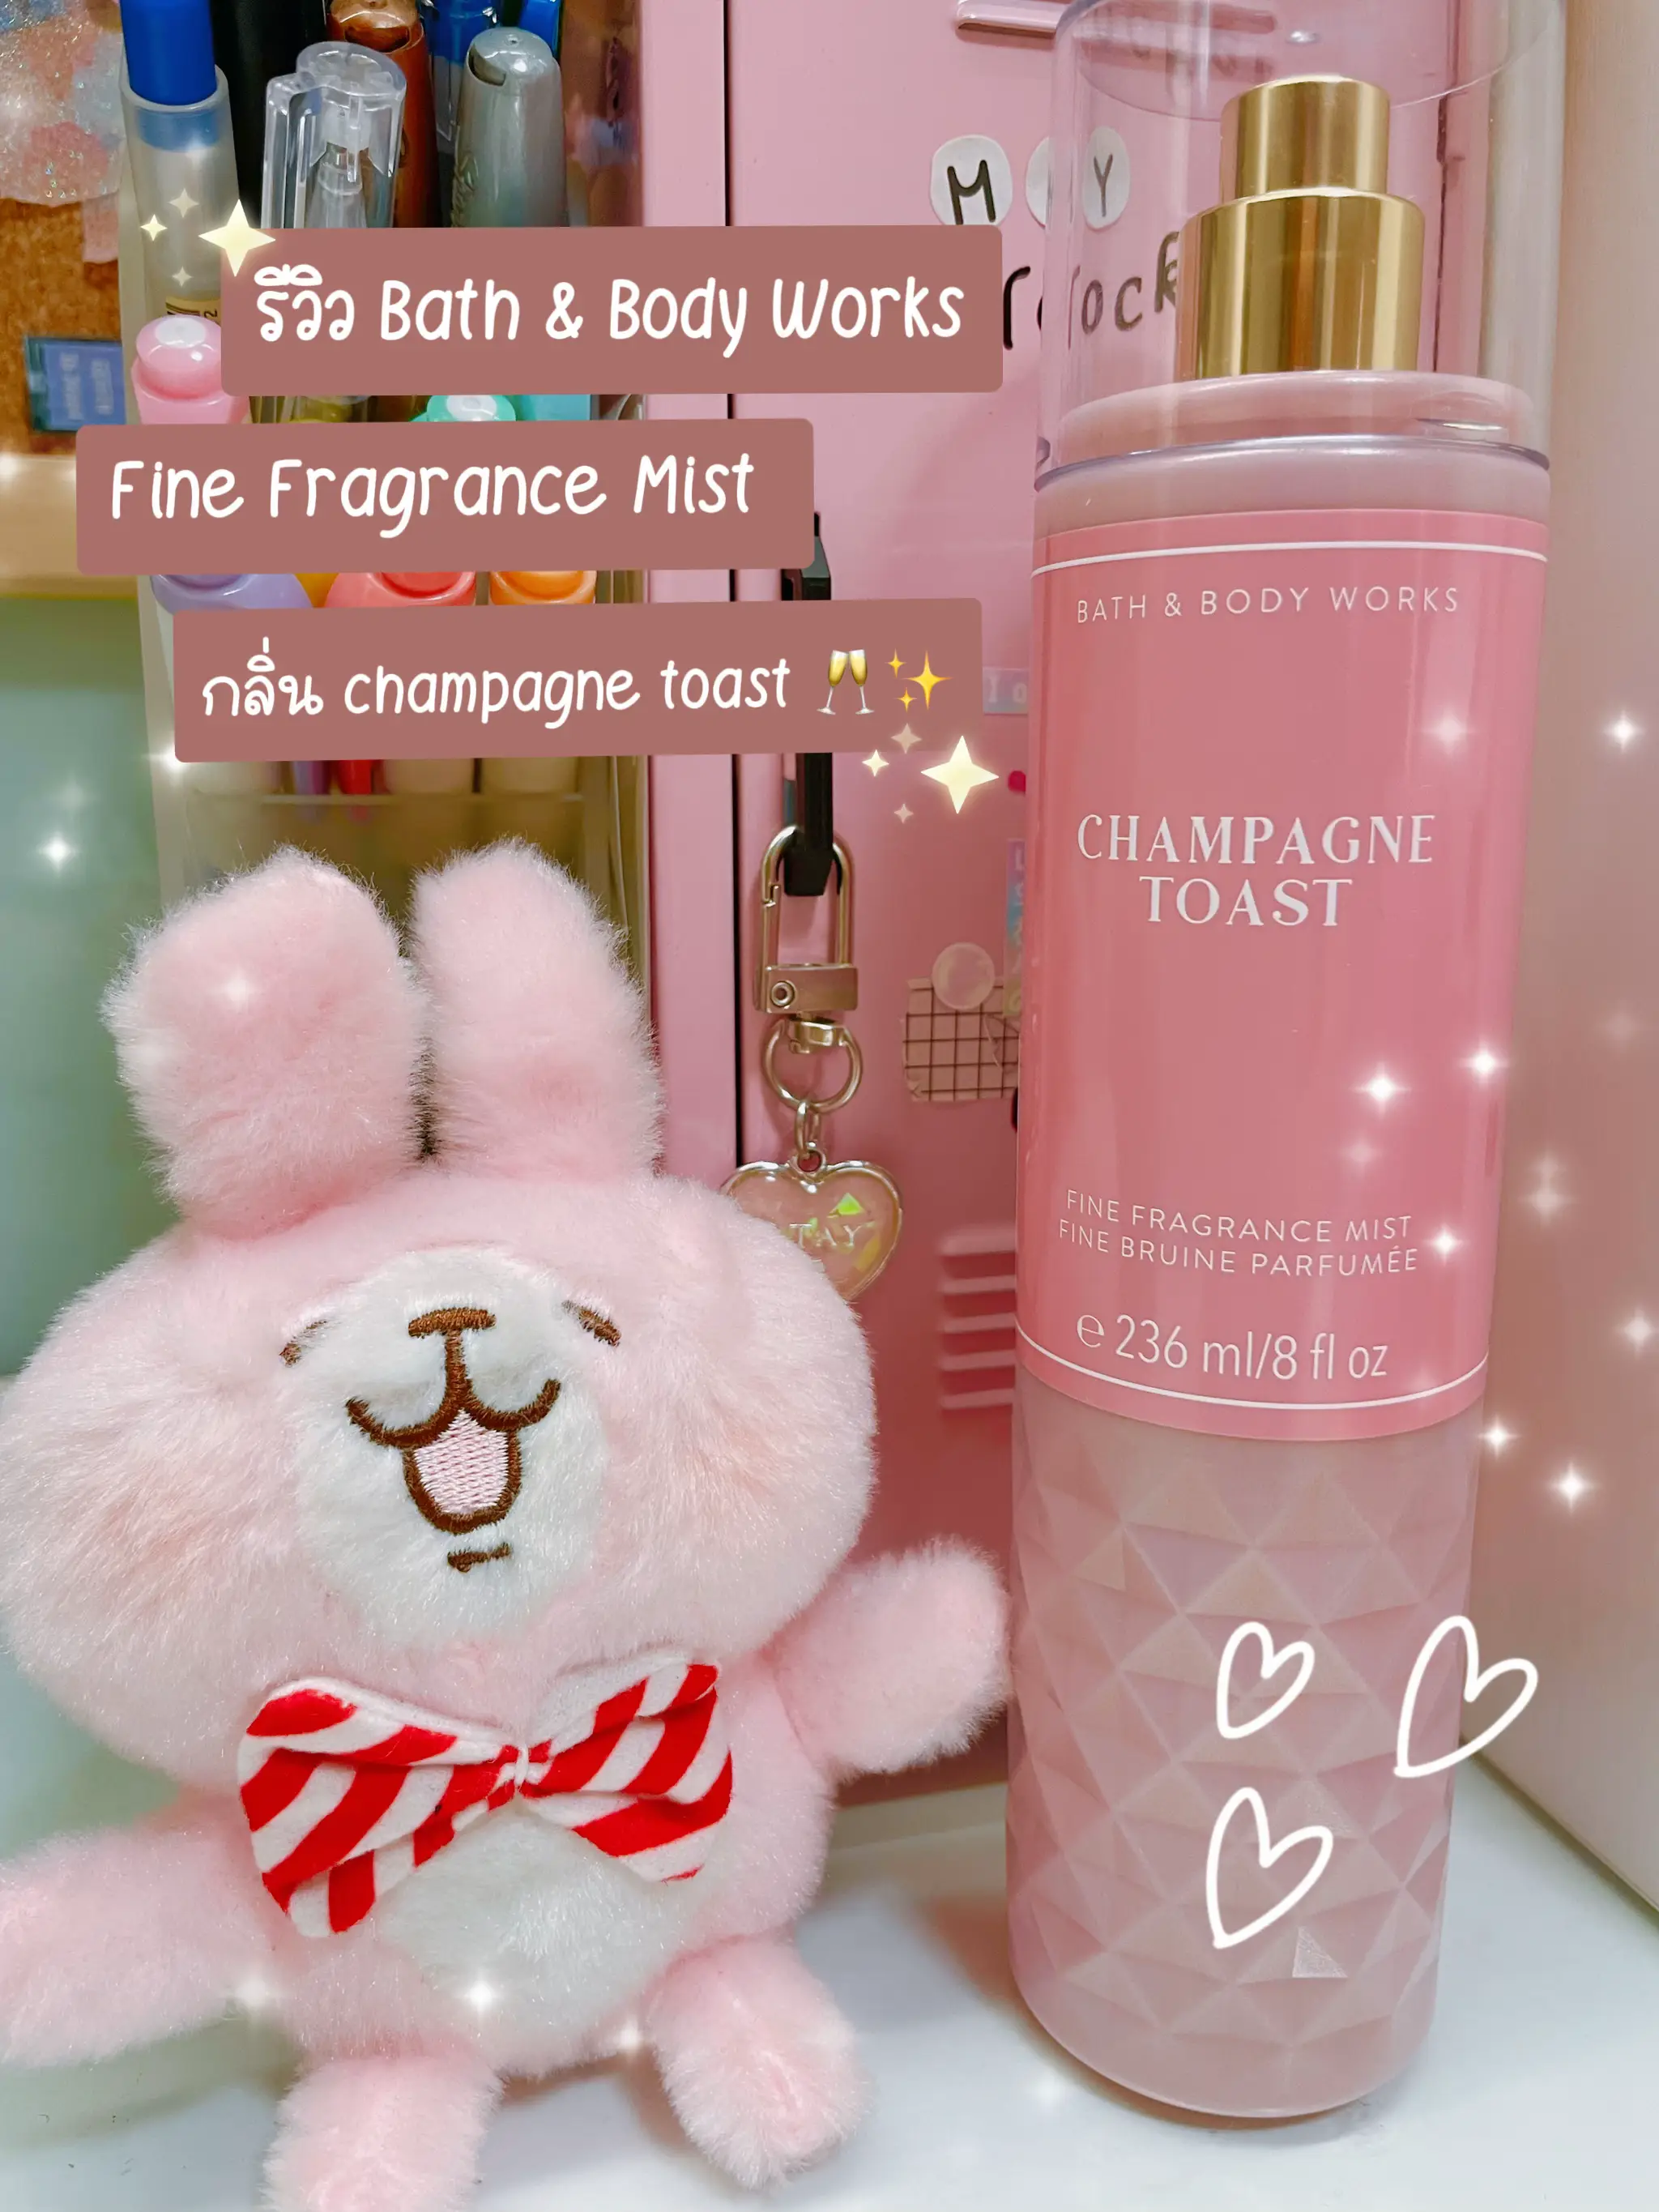 B&BW CHAMPAGNE TOAST FRAGRANCE MIST REVIEW !!! 